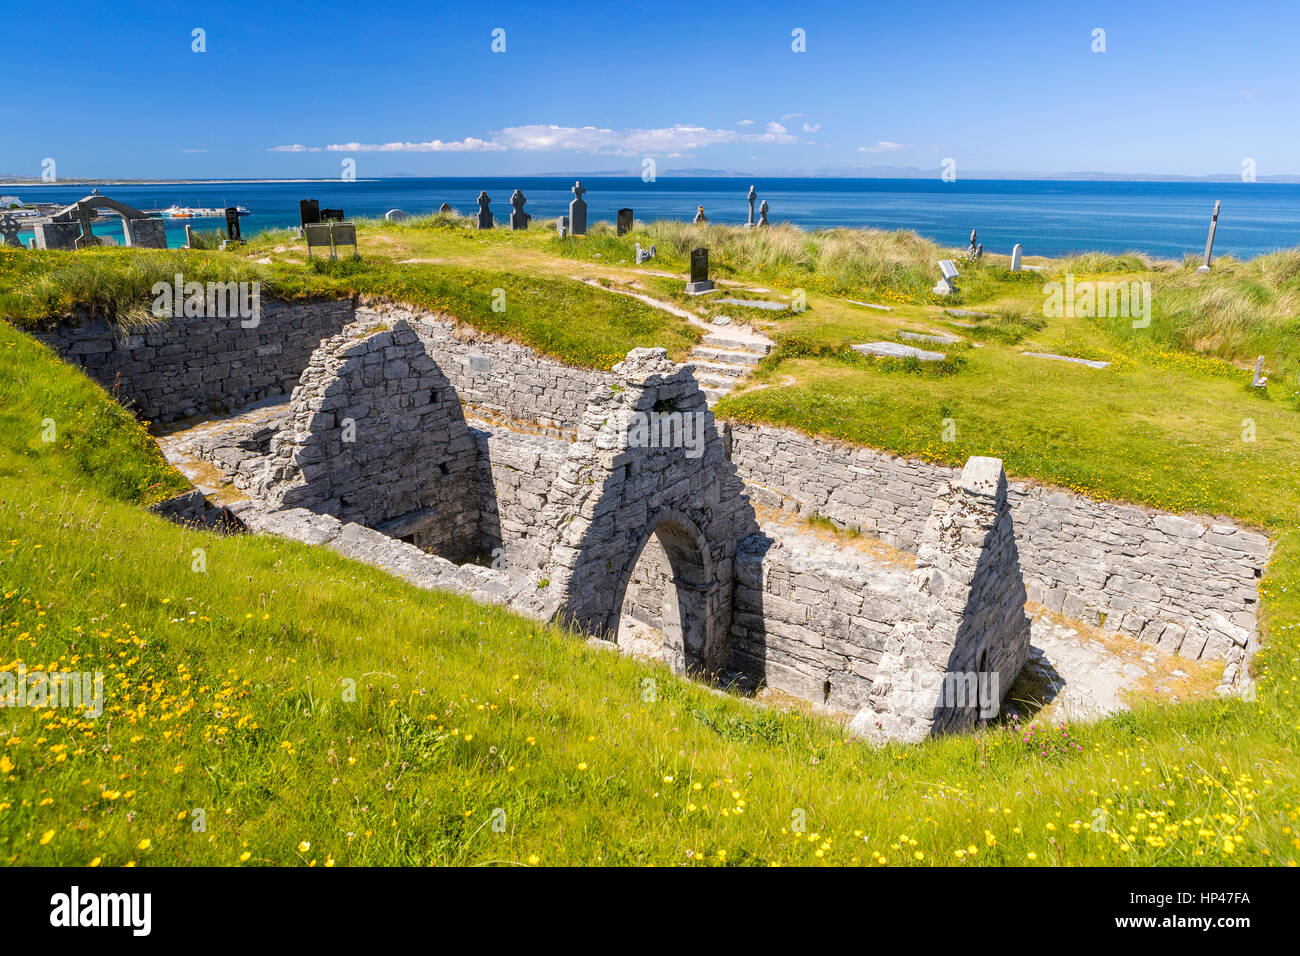 Saint Caomhan's church with Caomhan's grave at Inis Oirr, County Galway, Ireland, Europe. Stock Photo